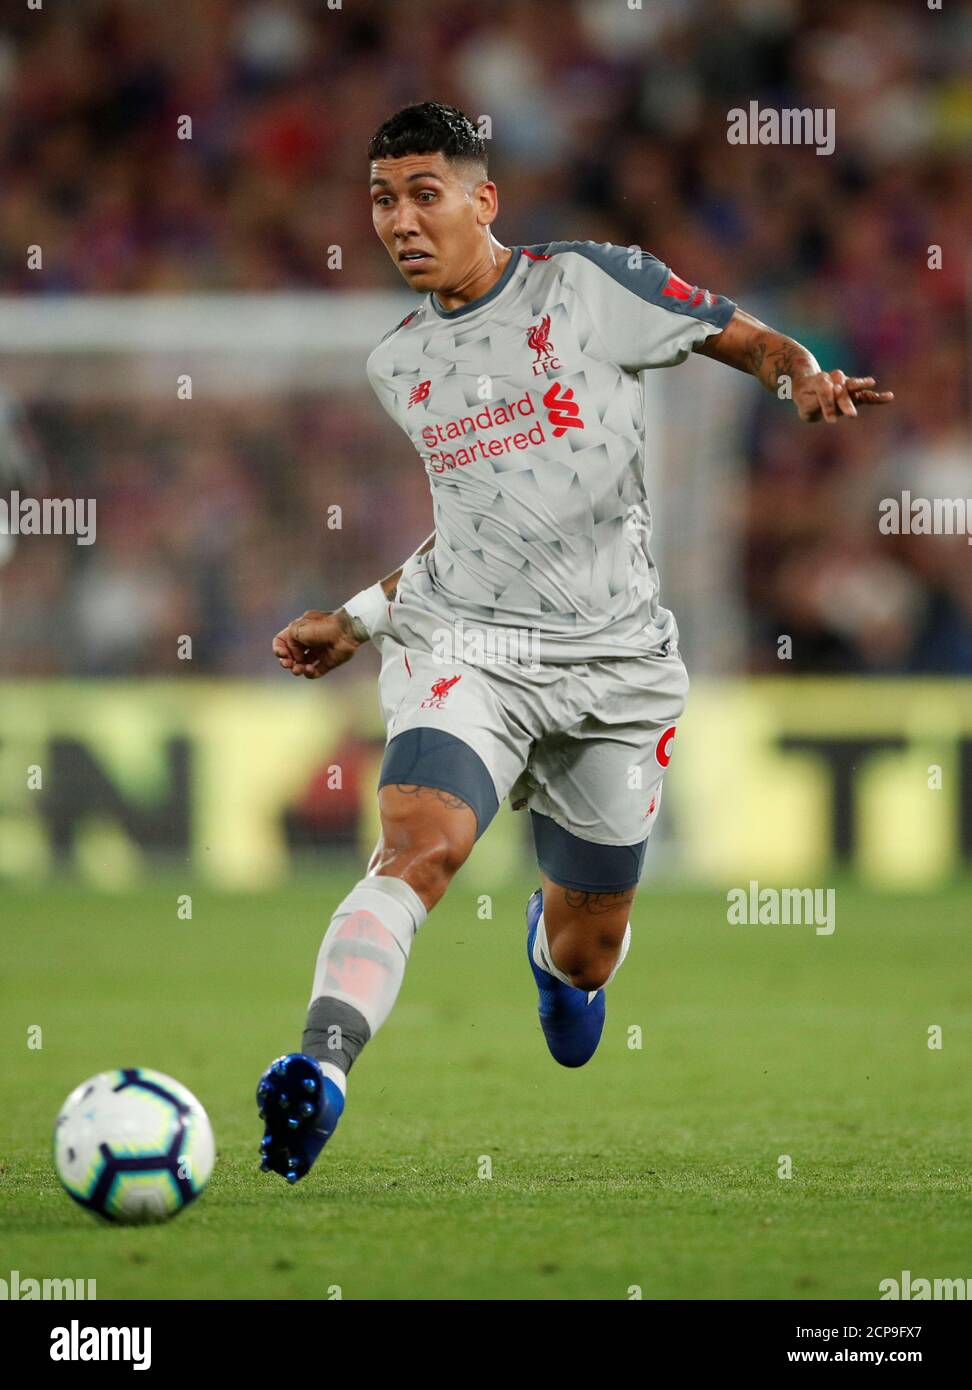 Soccer Football - Premier League - Crystal Palace v Liverpool - Selhurst Park, London, Britain - August 20, 2018 Liverpool's Roberto Firmino  Action Images via Reuters/John Sibley  EDITORIAL USE ONLY. No use with unauthorized audio, video, data, fixture lists, club/league logos or 'live' services. Online in-match use limited to 75 images, no video emulation. No use in betting, games or single club/league/player publications.  Please contact your account representative for further details. Stock Photo